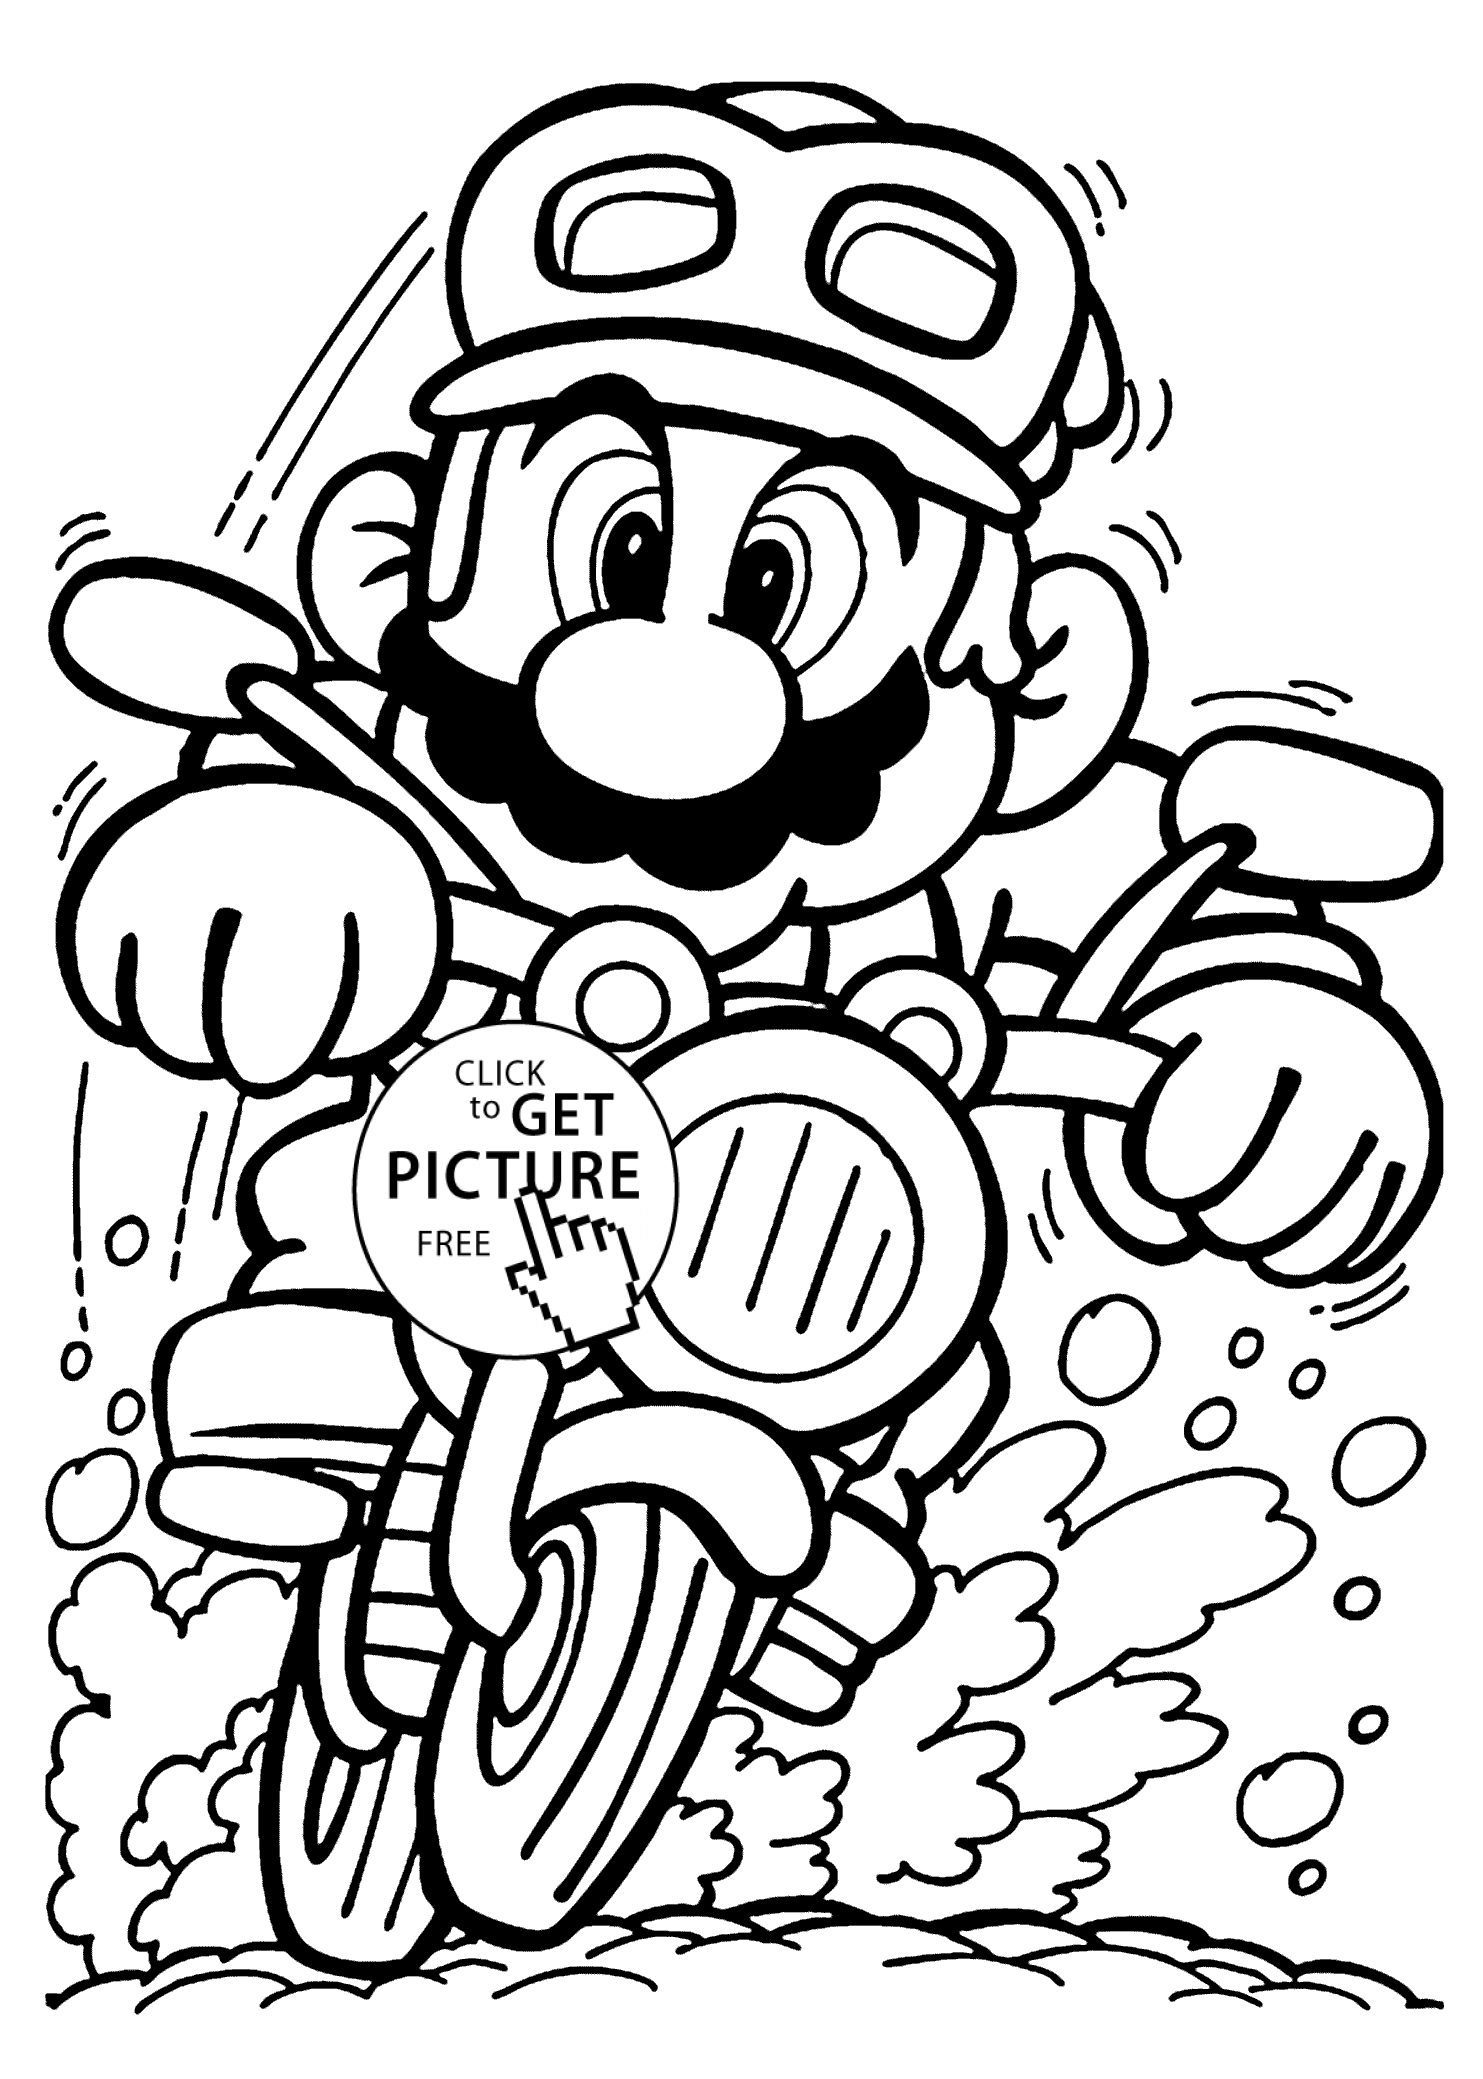 Mario Coloring Pages To Print Mario On Motorcycle Coloring Pages For Kids Printable Free